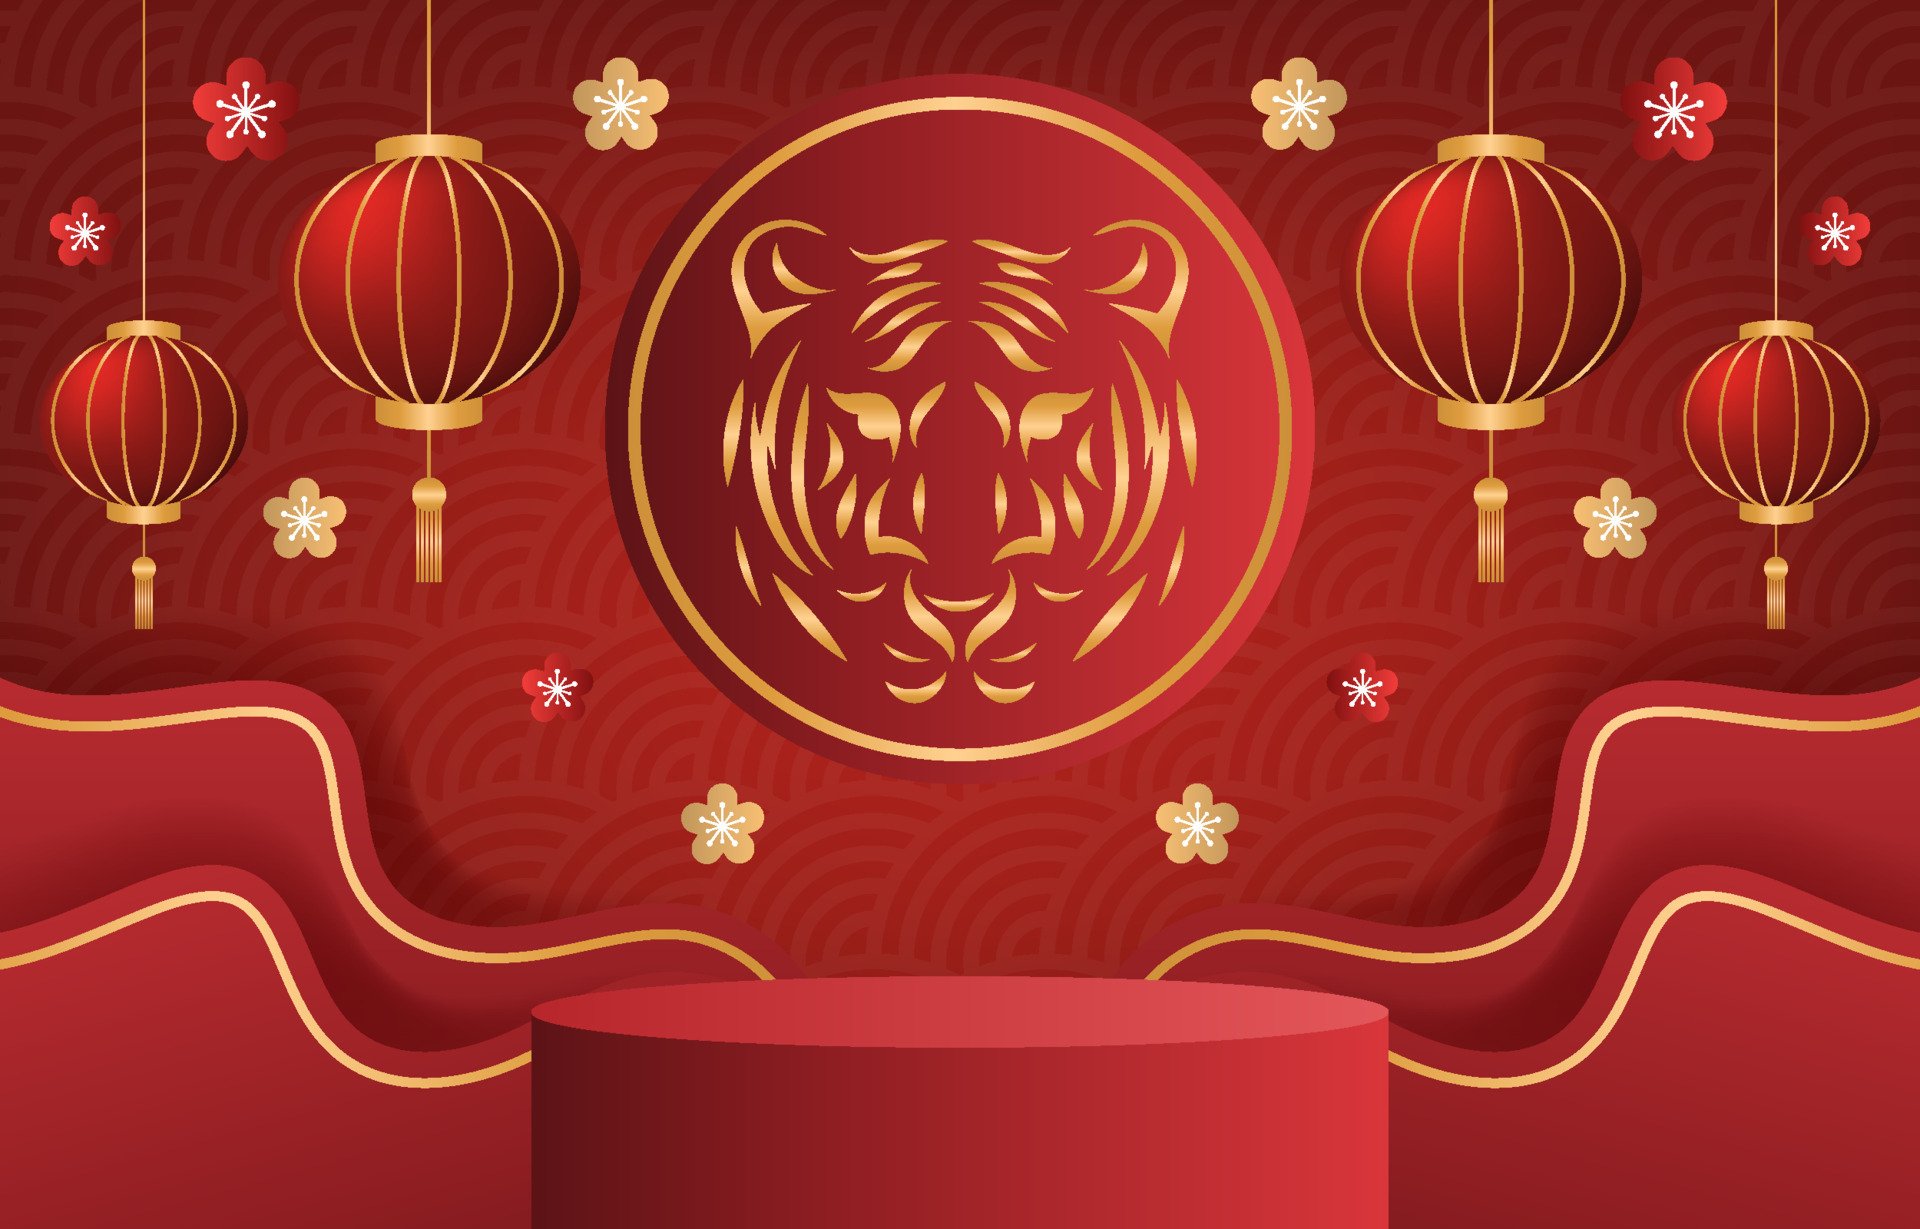 chinese new year, holiday, year of the tiger